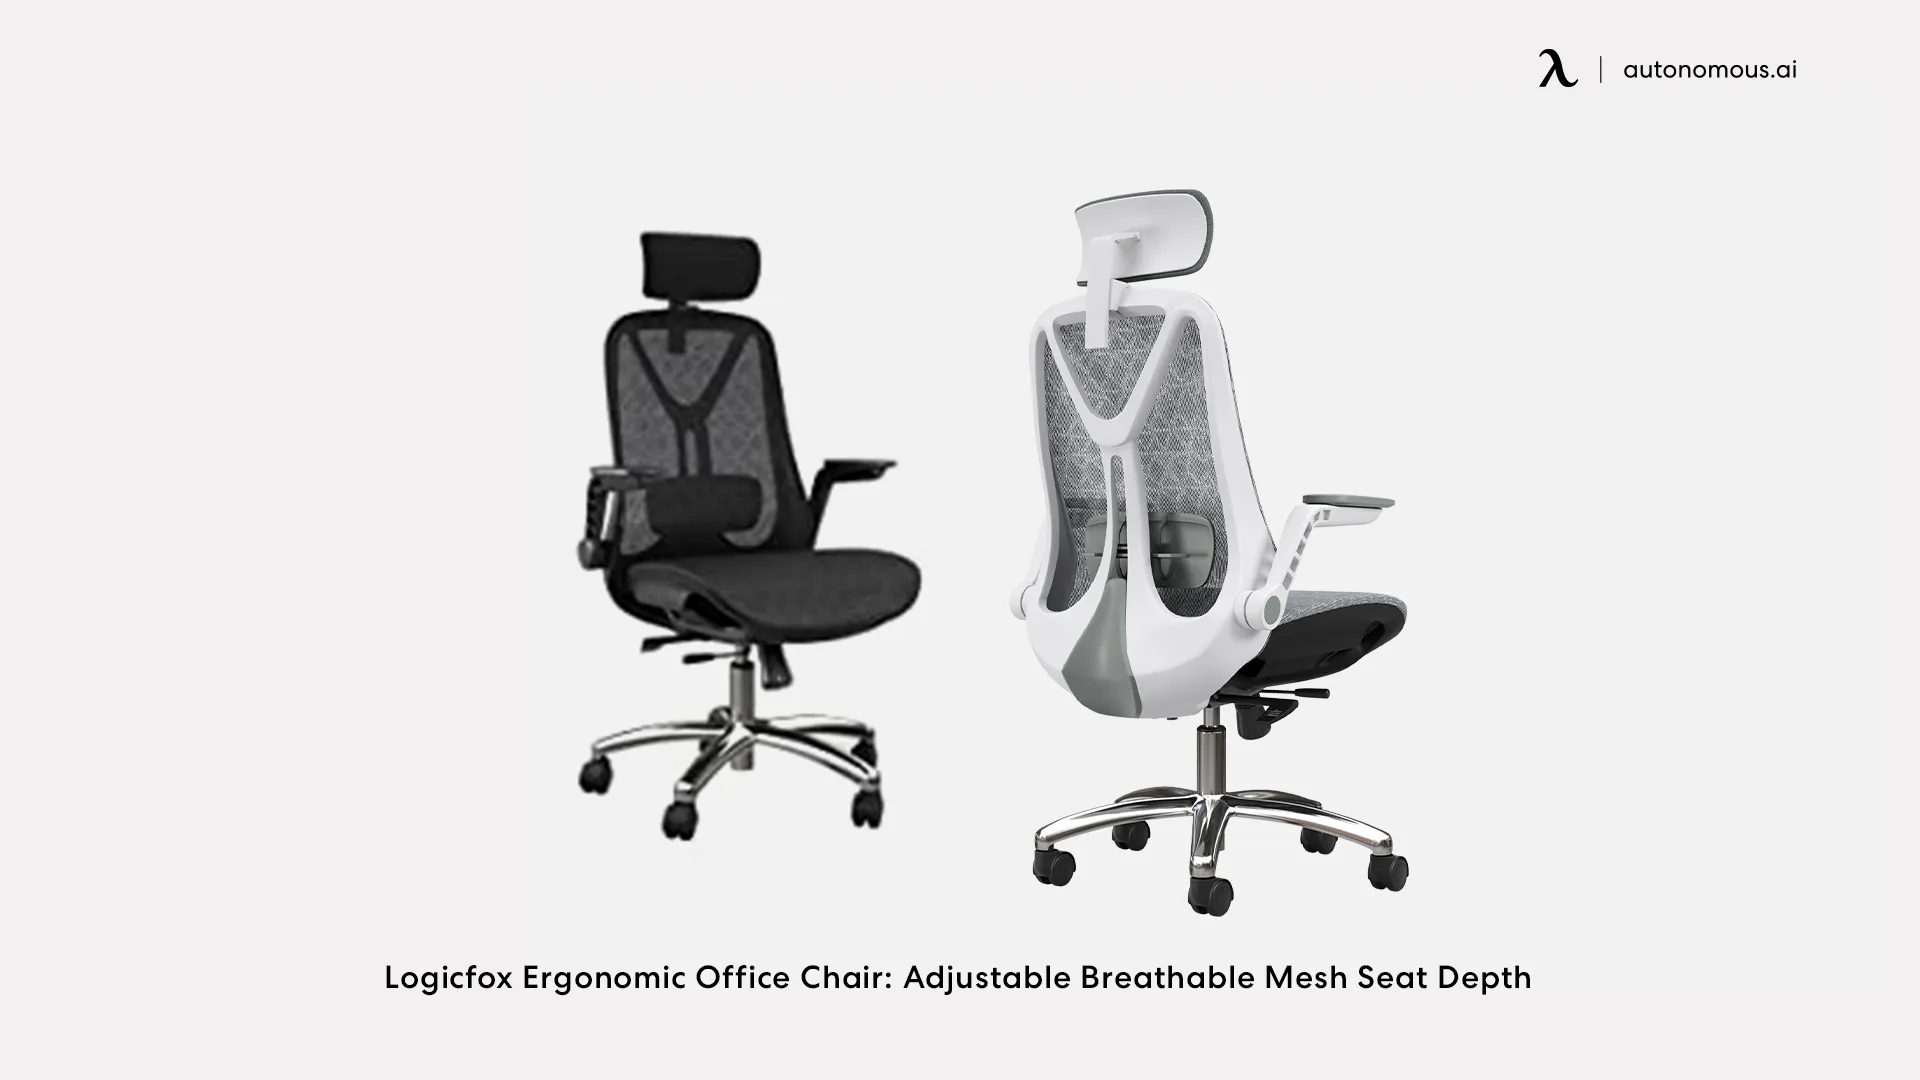 Logicfox Adjustable Breathable Mesh Seat Depth Office Chair